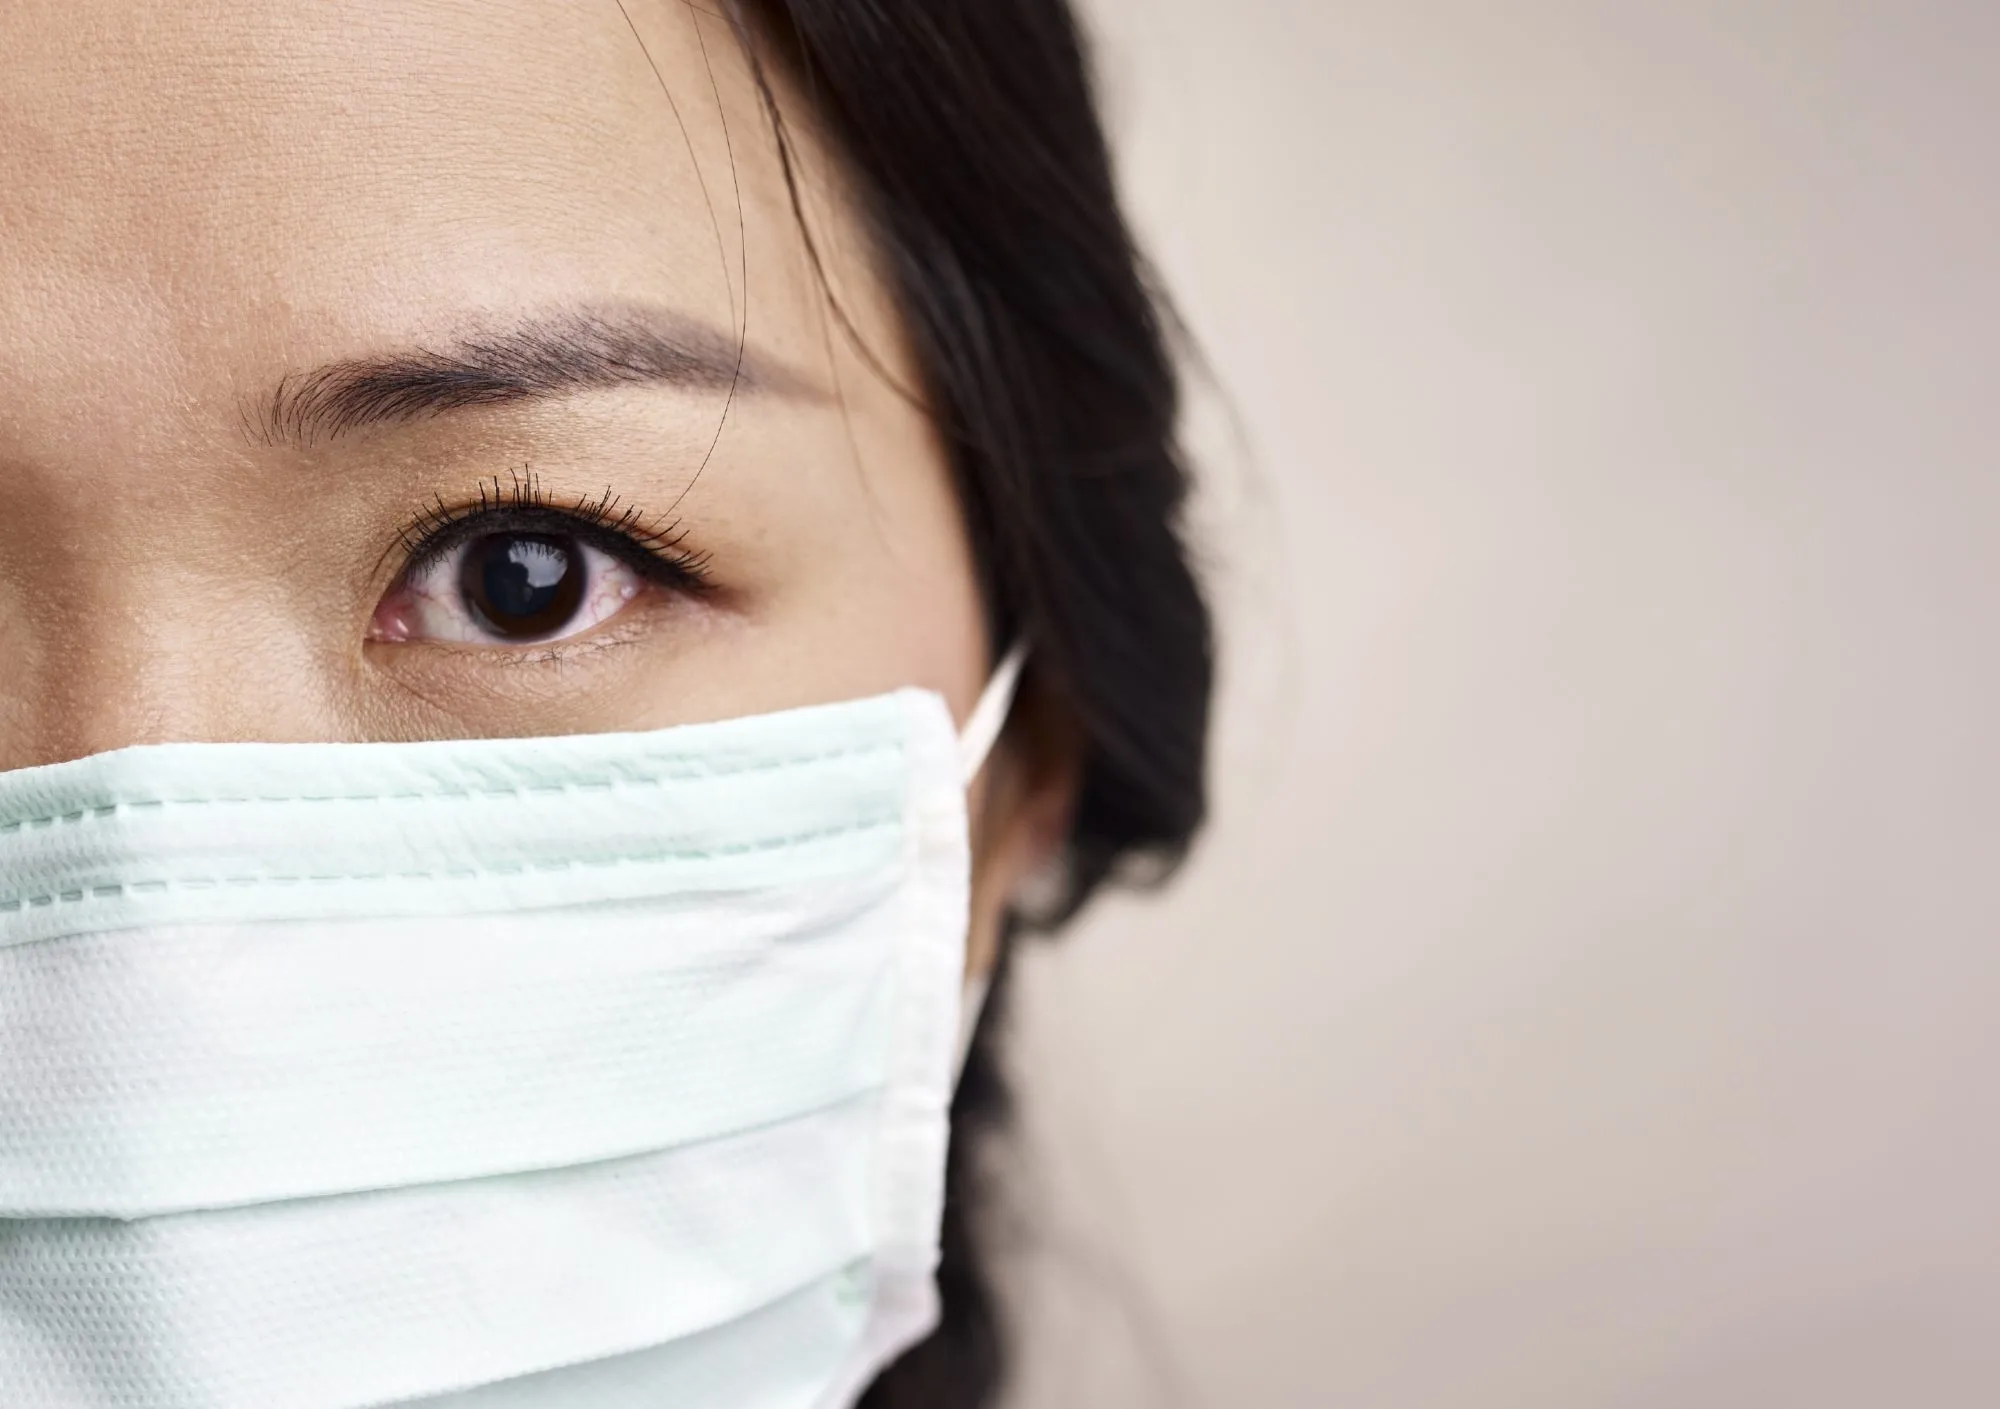 Coronavirus: Face Masks May Not Work As Well As You Think